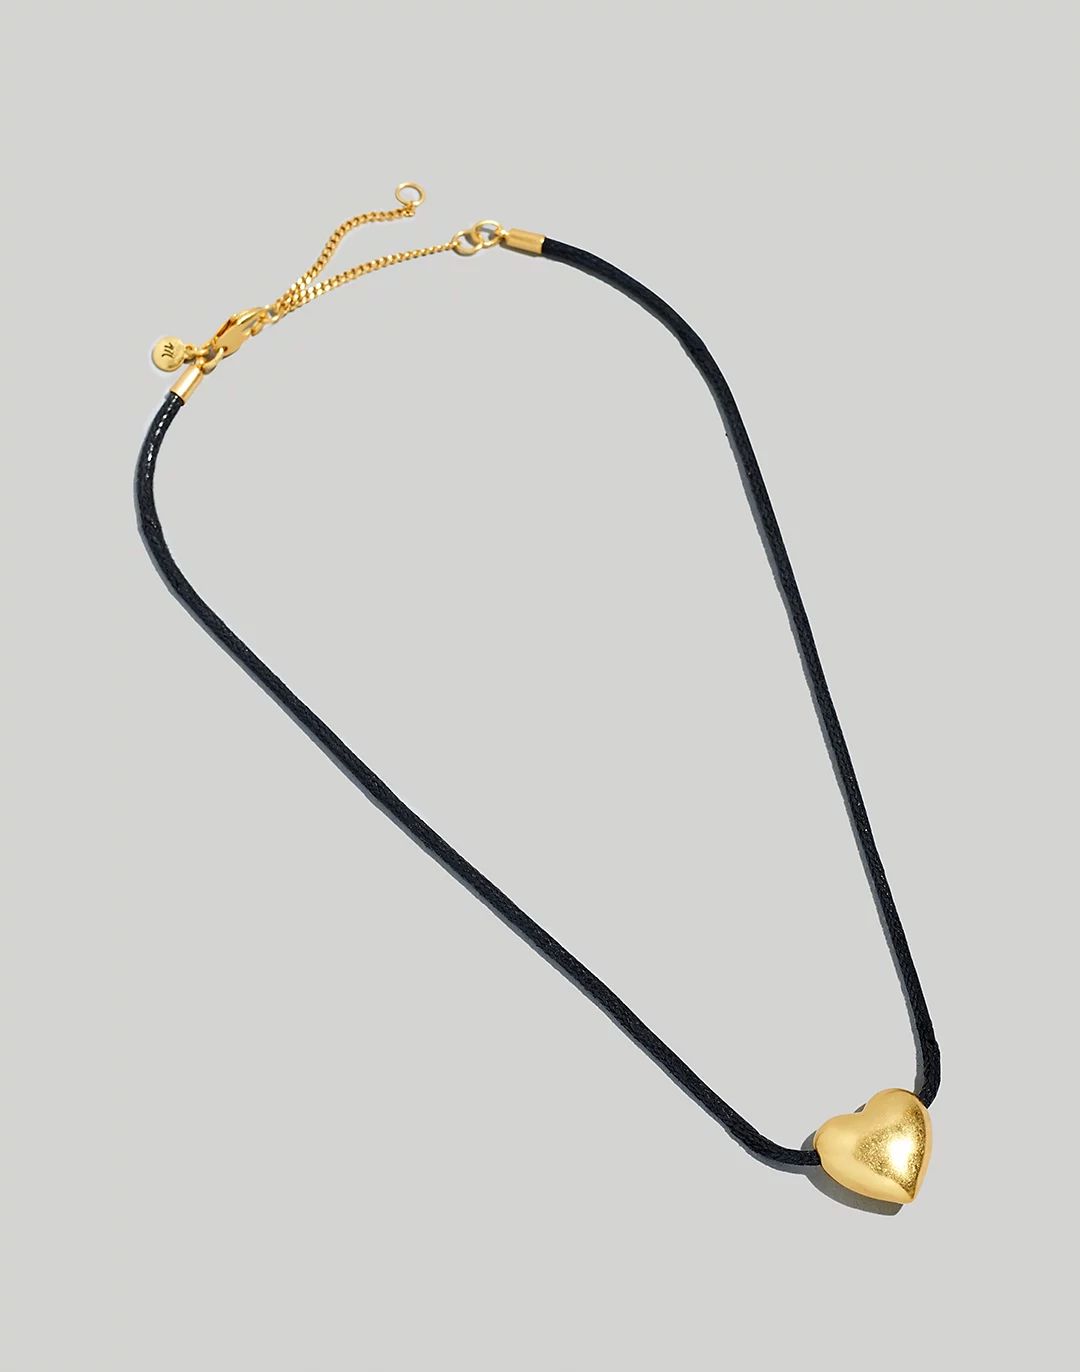 Puffy Heart Cord Choker Necklace | Madewell